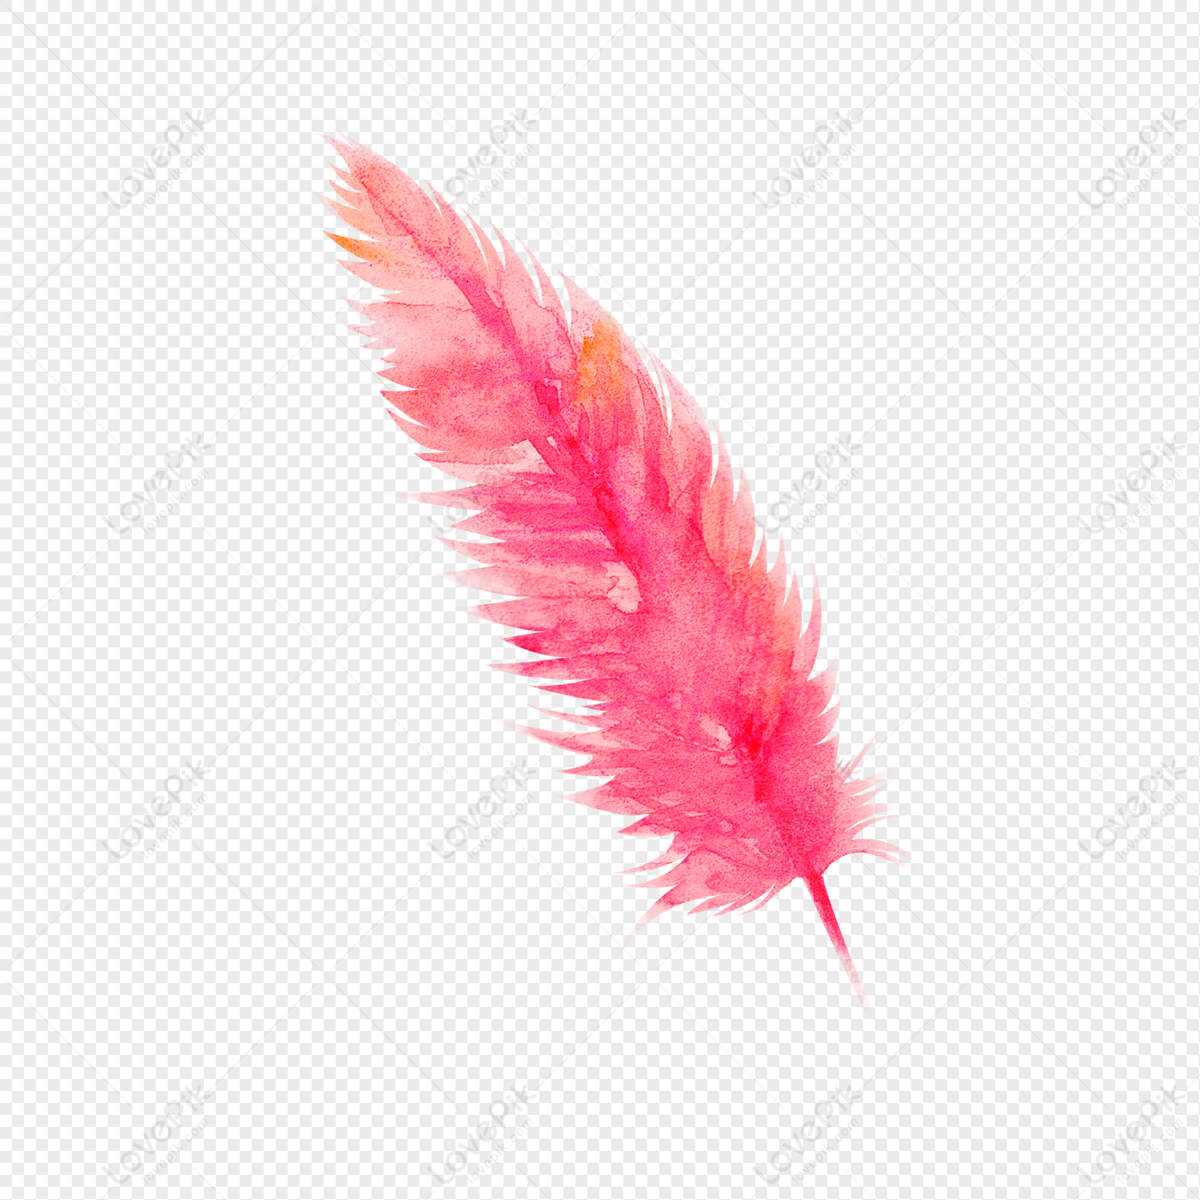 Pink Feather PNG Transparent Images Free Download, Vector Files